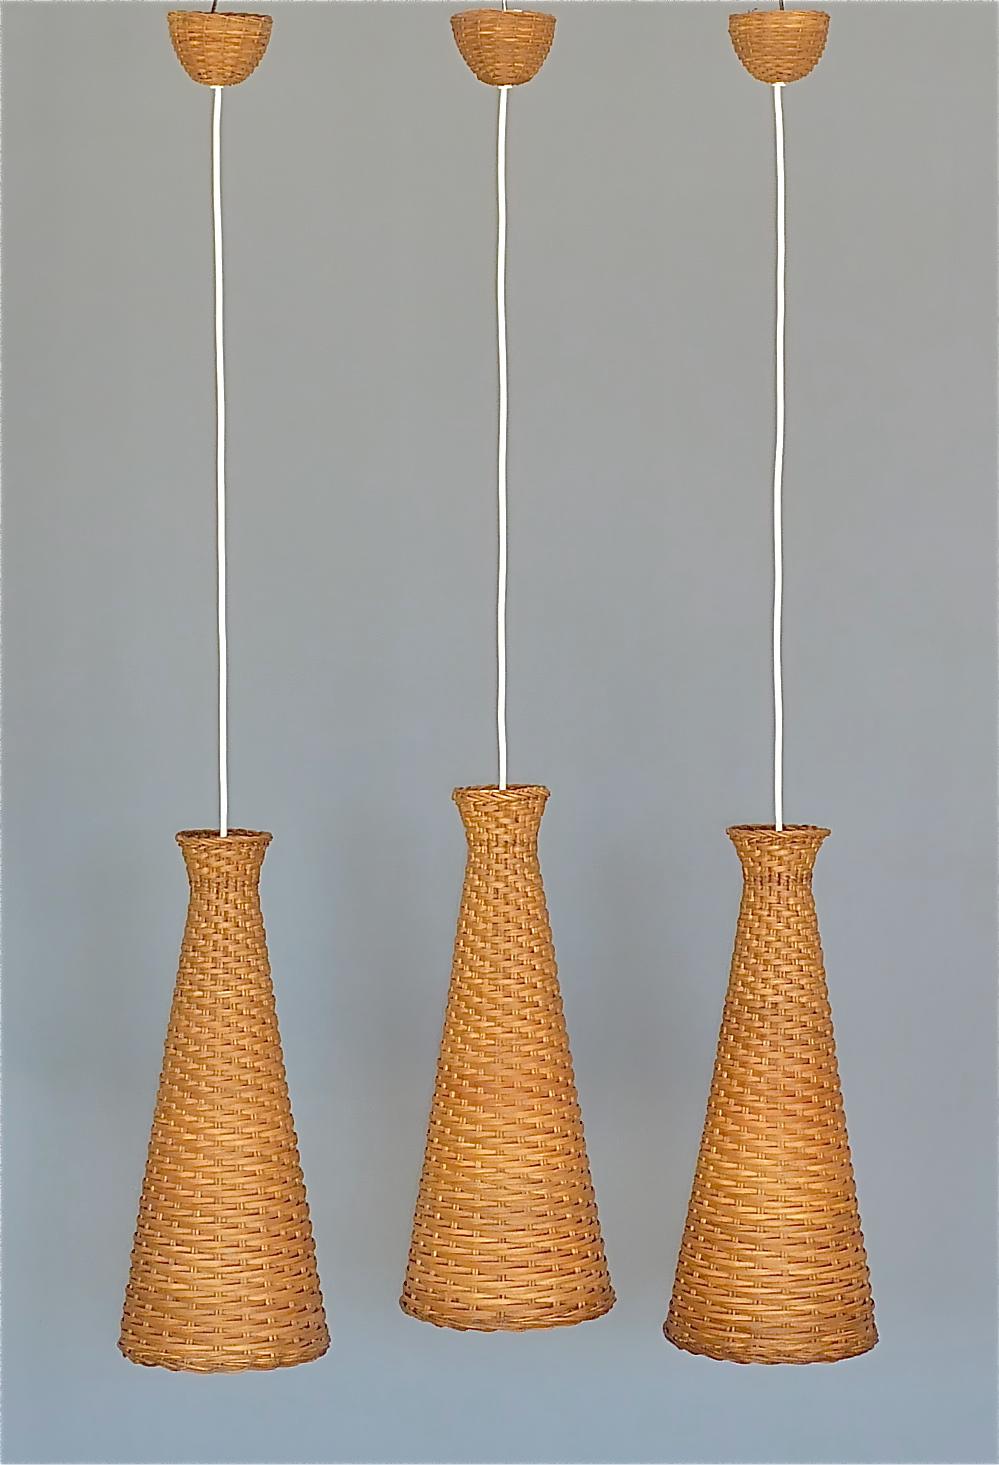 Rare set of three large diabolo rattan / wicker pendant lamps, Swedish / Scandinavian designer around 1960. The lovely and highly decorative Mid-Century Modern diabolo hanging lights are beautifully hand-crafted, hand-woven rattan body fixtures and